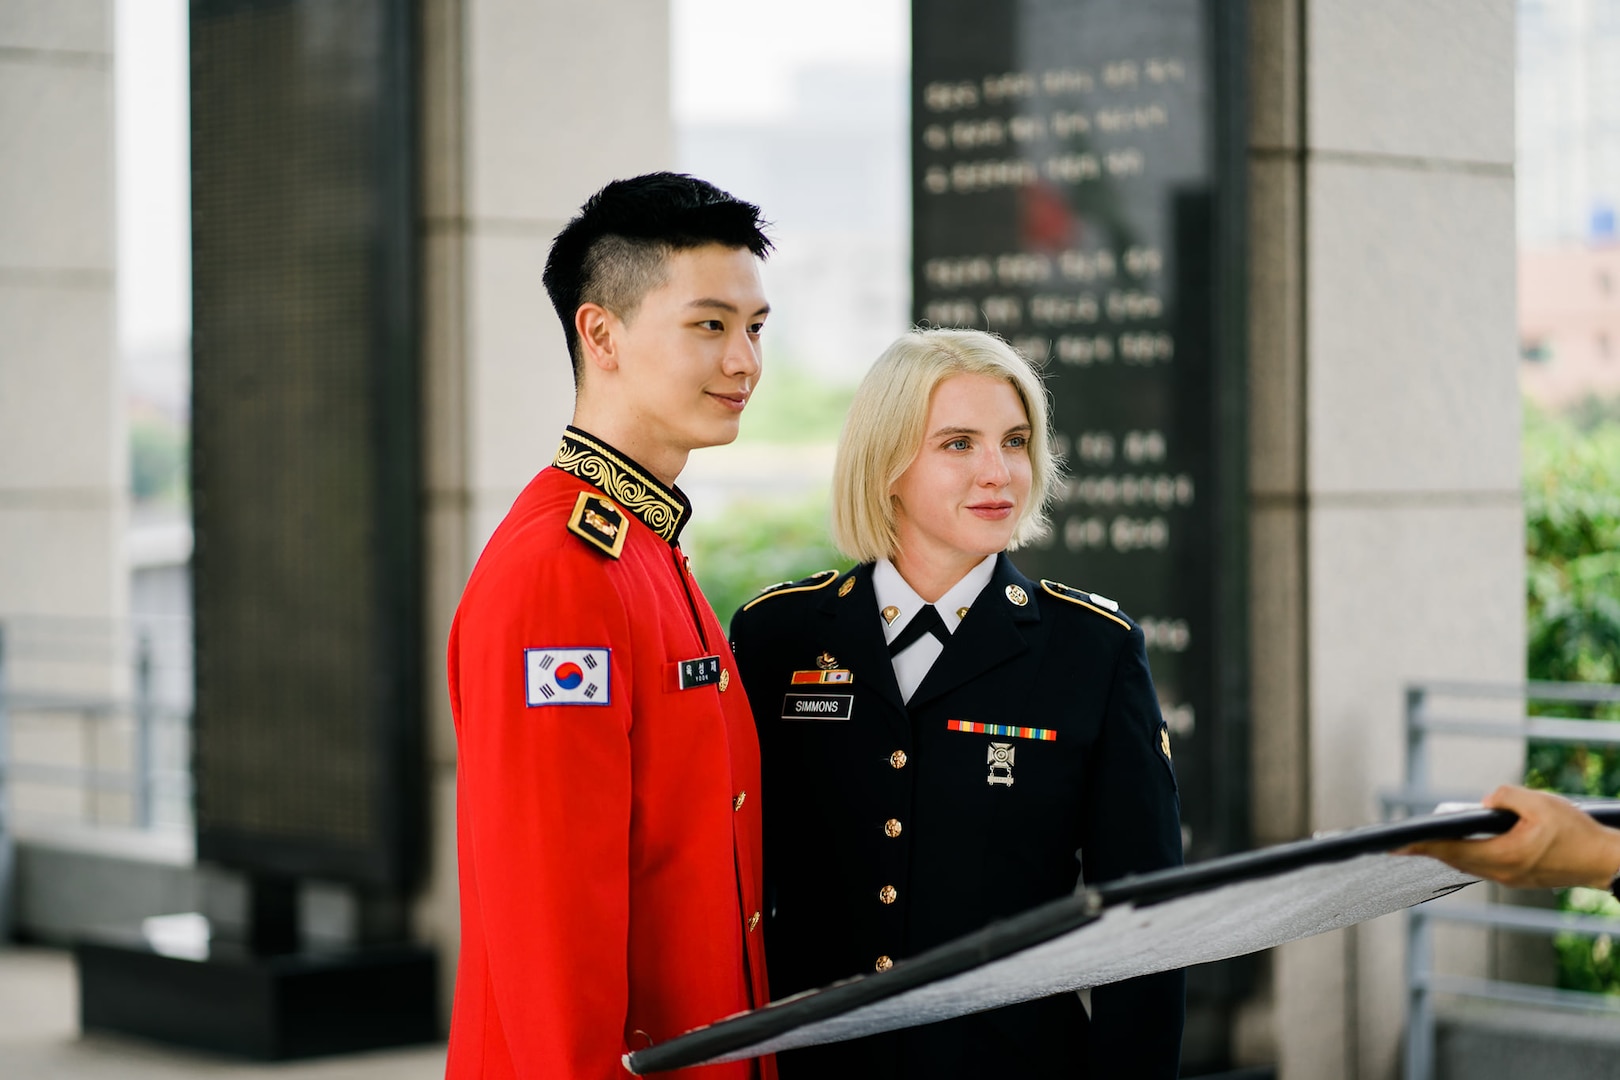 ROK Army Sgt. Yook Sung-jae stands in dress uniform next to U.S. Army Spc. Brittany D. Simmons in the center frame and looking off to the right. A person off screen holds a square photo reflector at the bottom. The background is at the War Memorial of Korea but blurred in the photo.